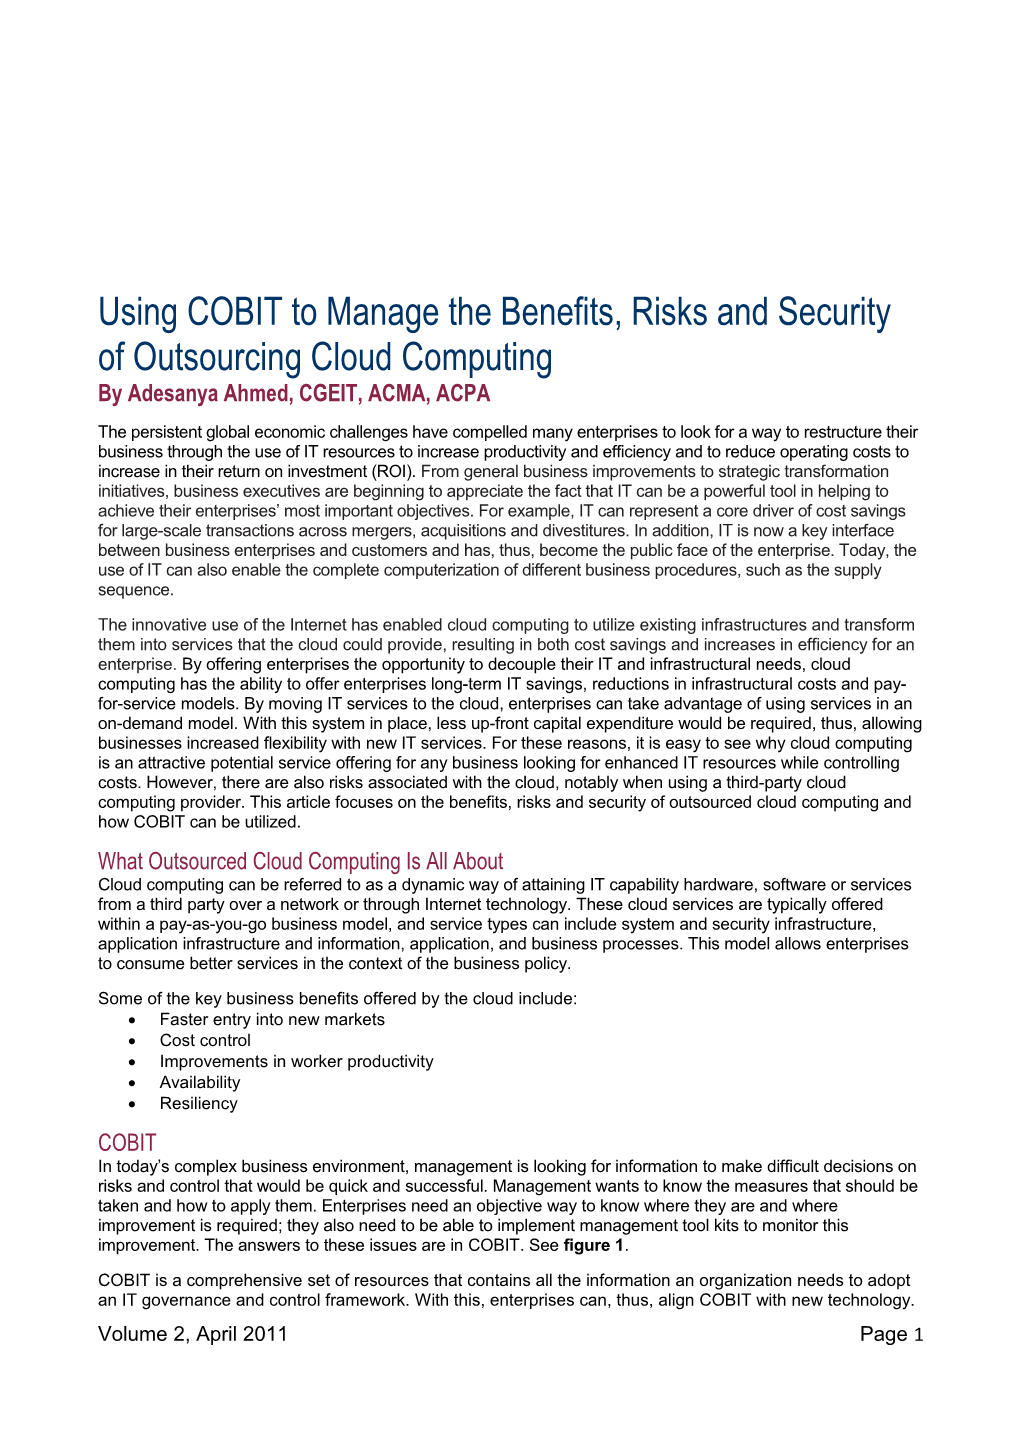 Using COBIT to Manage the Benefits, Risks, and Security of Outsourcing Cloud Computing